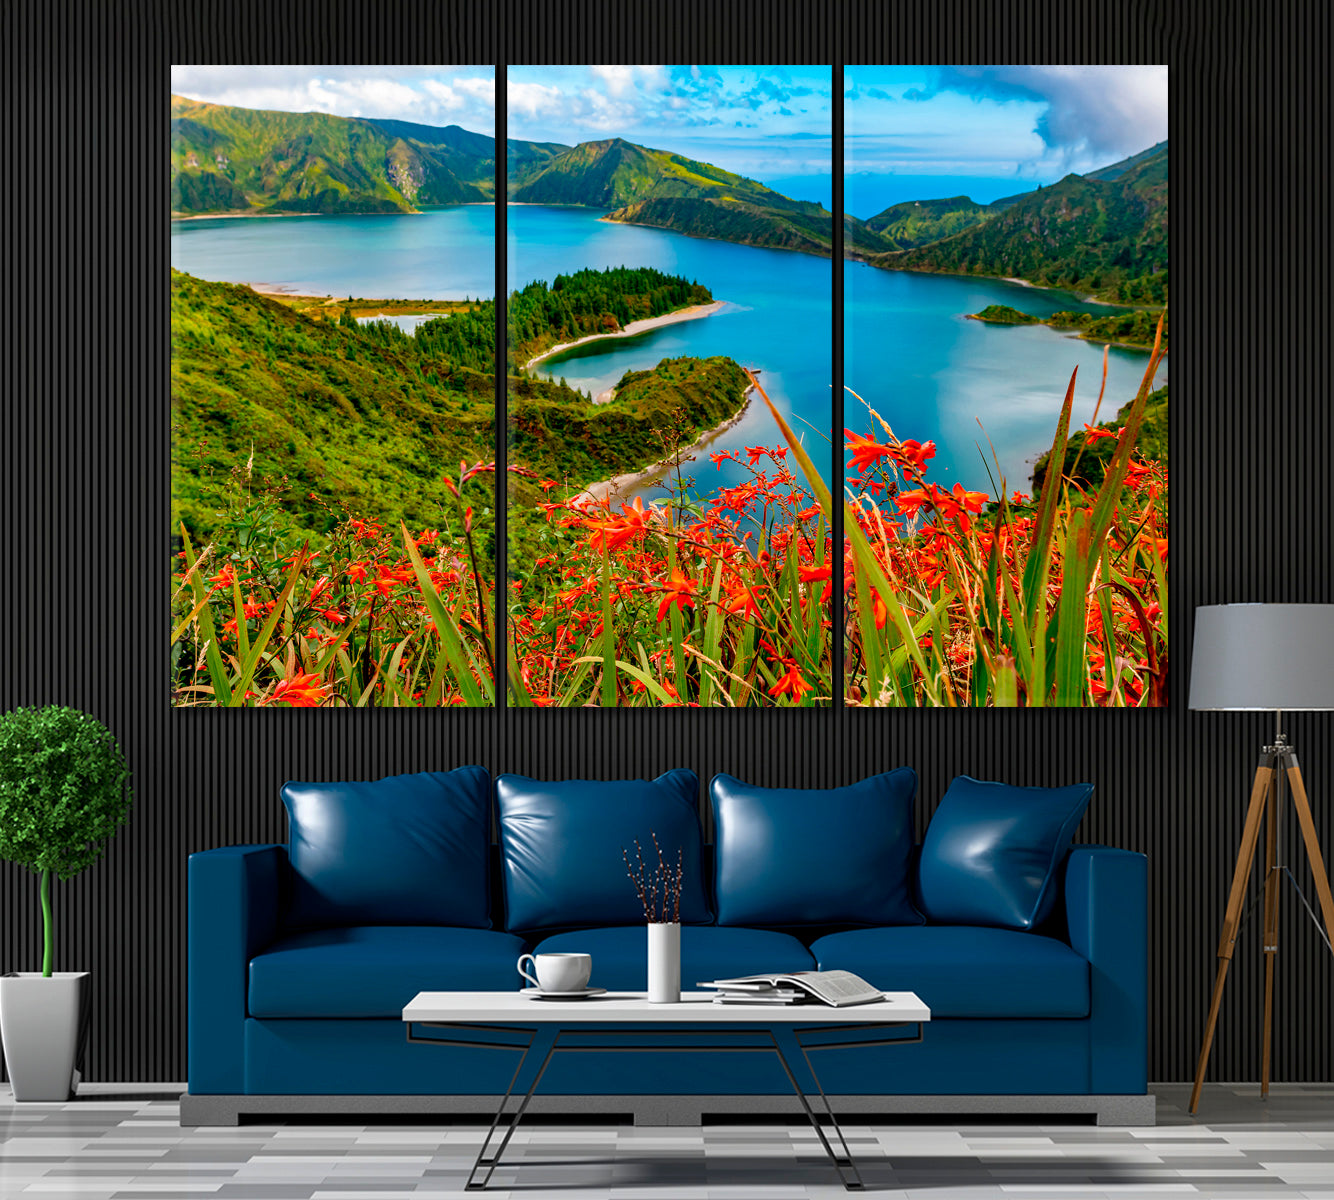 San Miguel Island Azores Canvas Print ArtLexy 3 Panels 36"x24" inches 